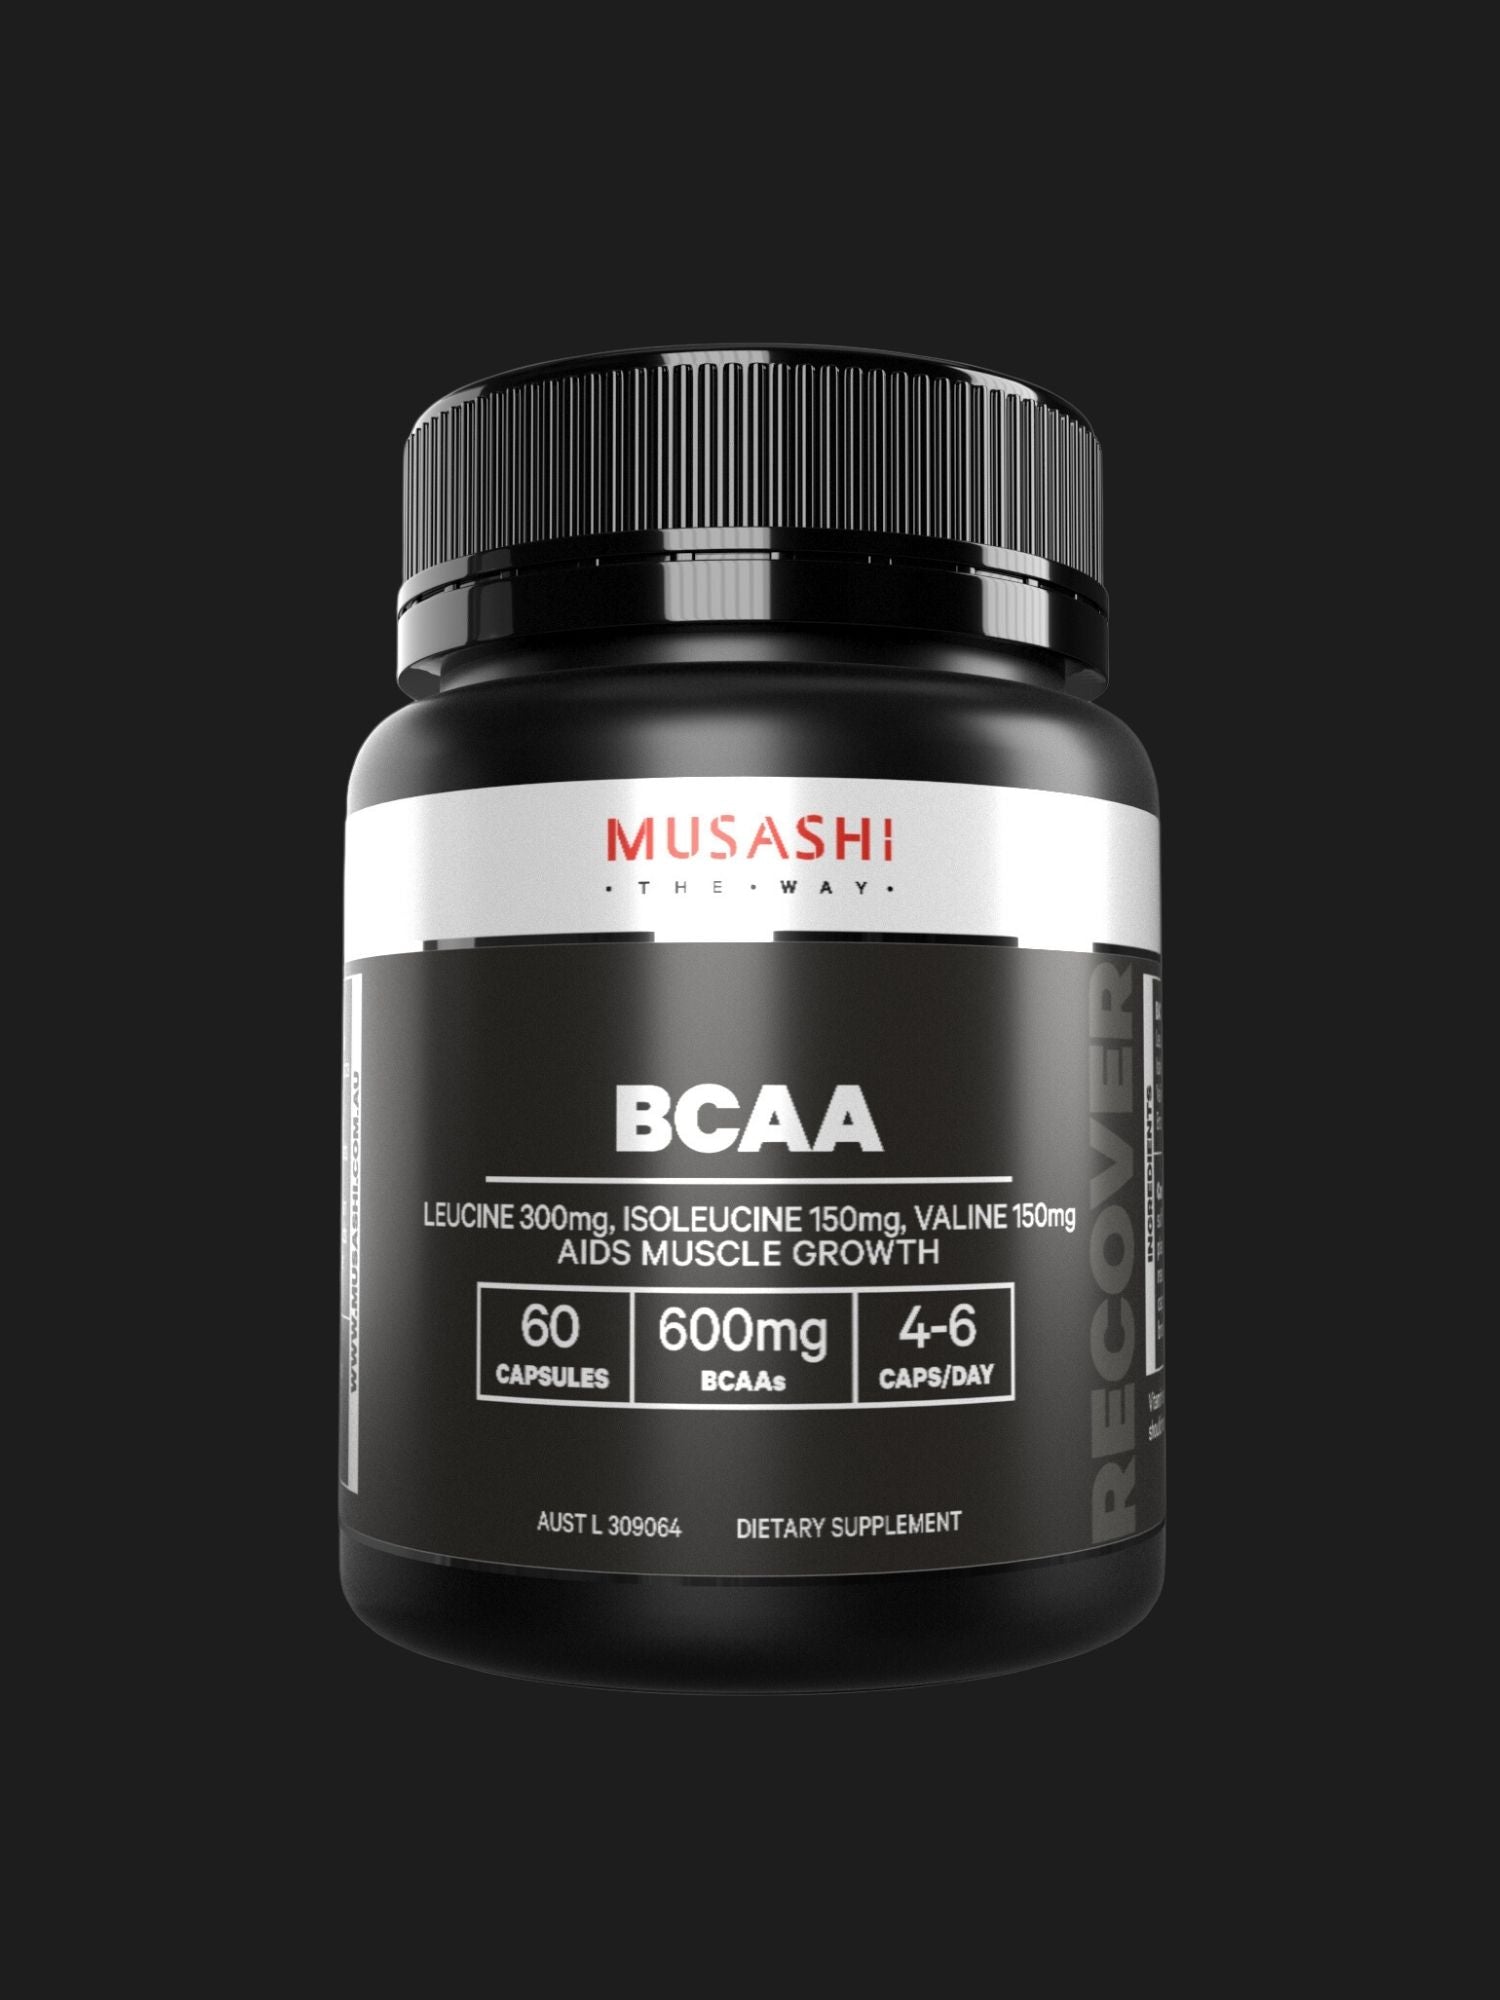 Branched Chain Amino Acids (BCAAs)